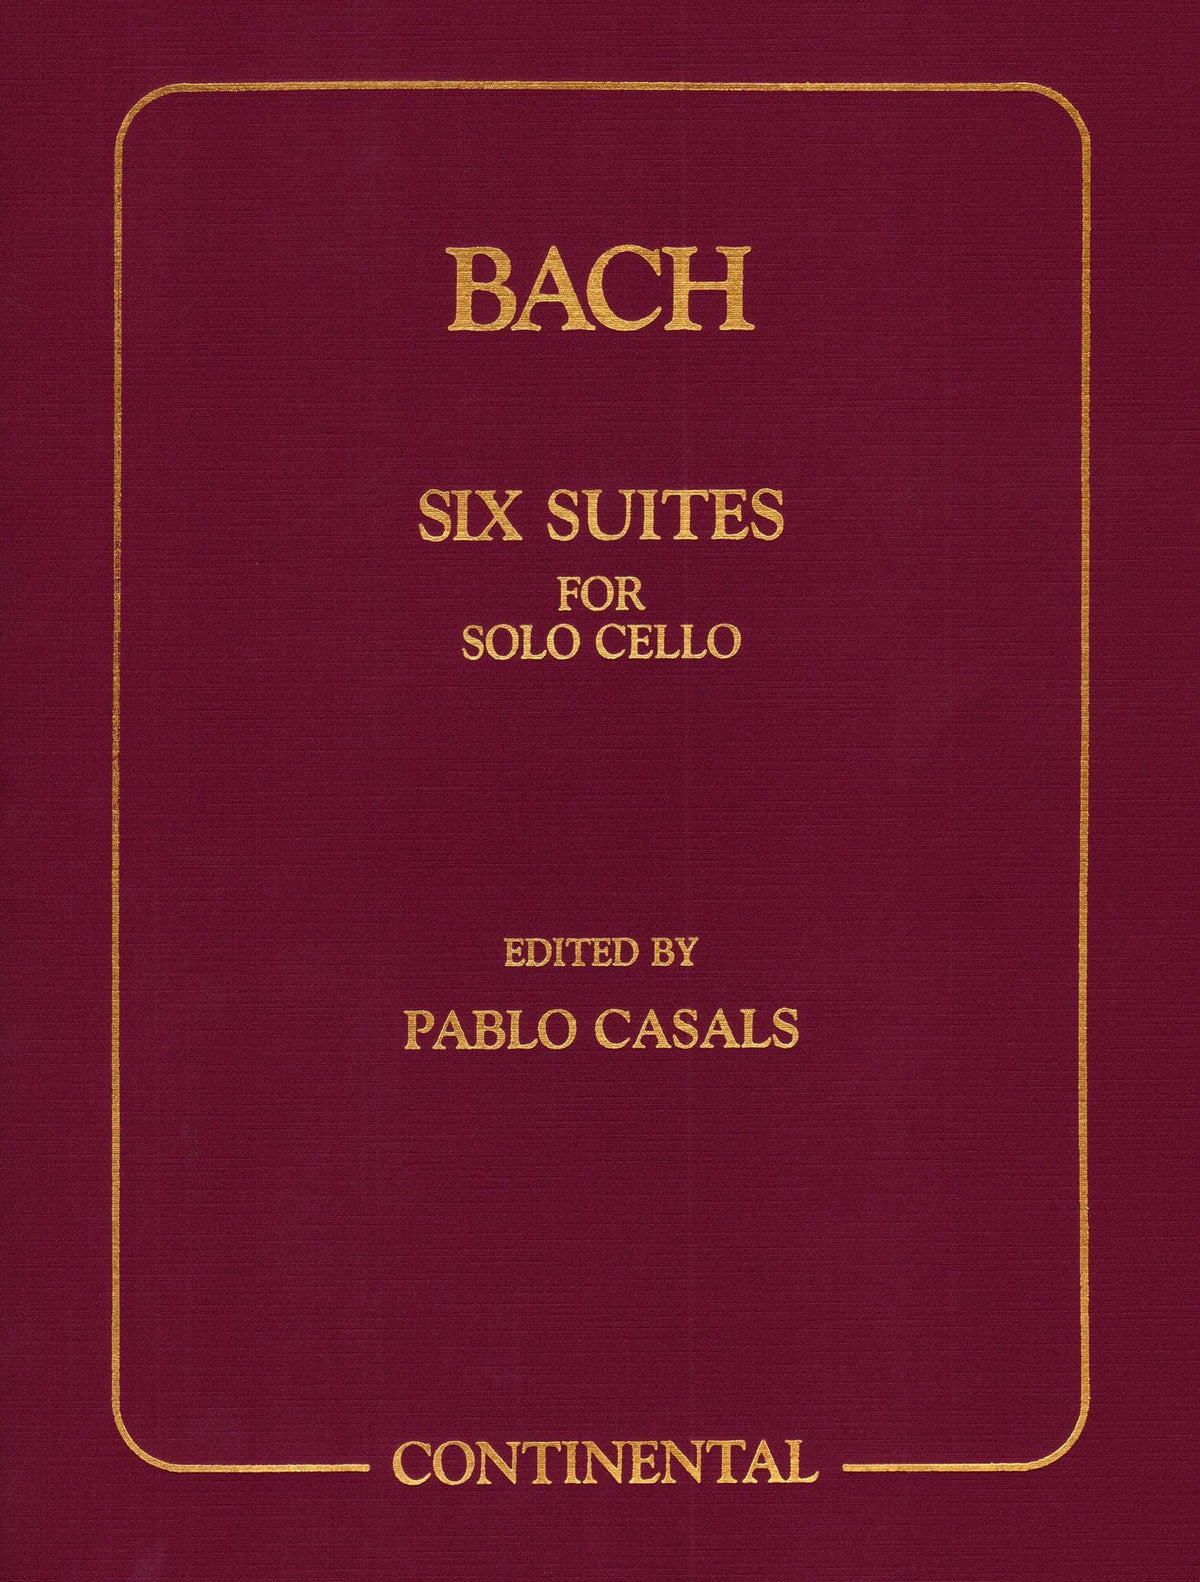 Bach, JS - 6 Cello Suites, BWV 1007-1012 - Edited by Pablo Casals - Continental Edition